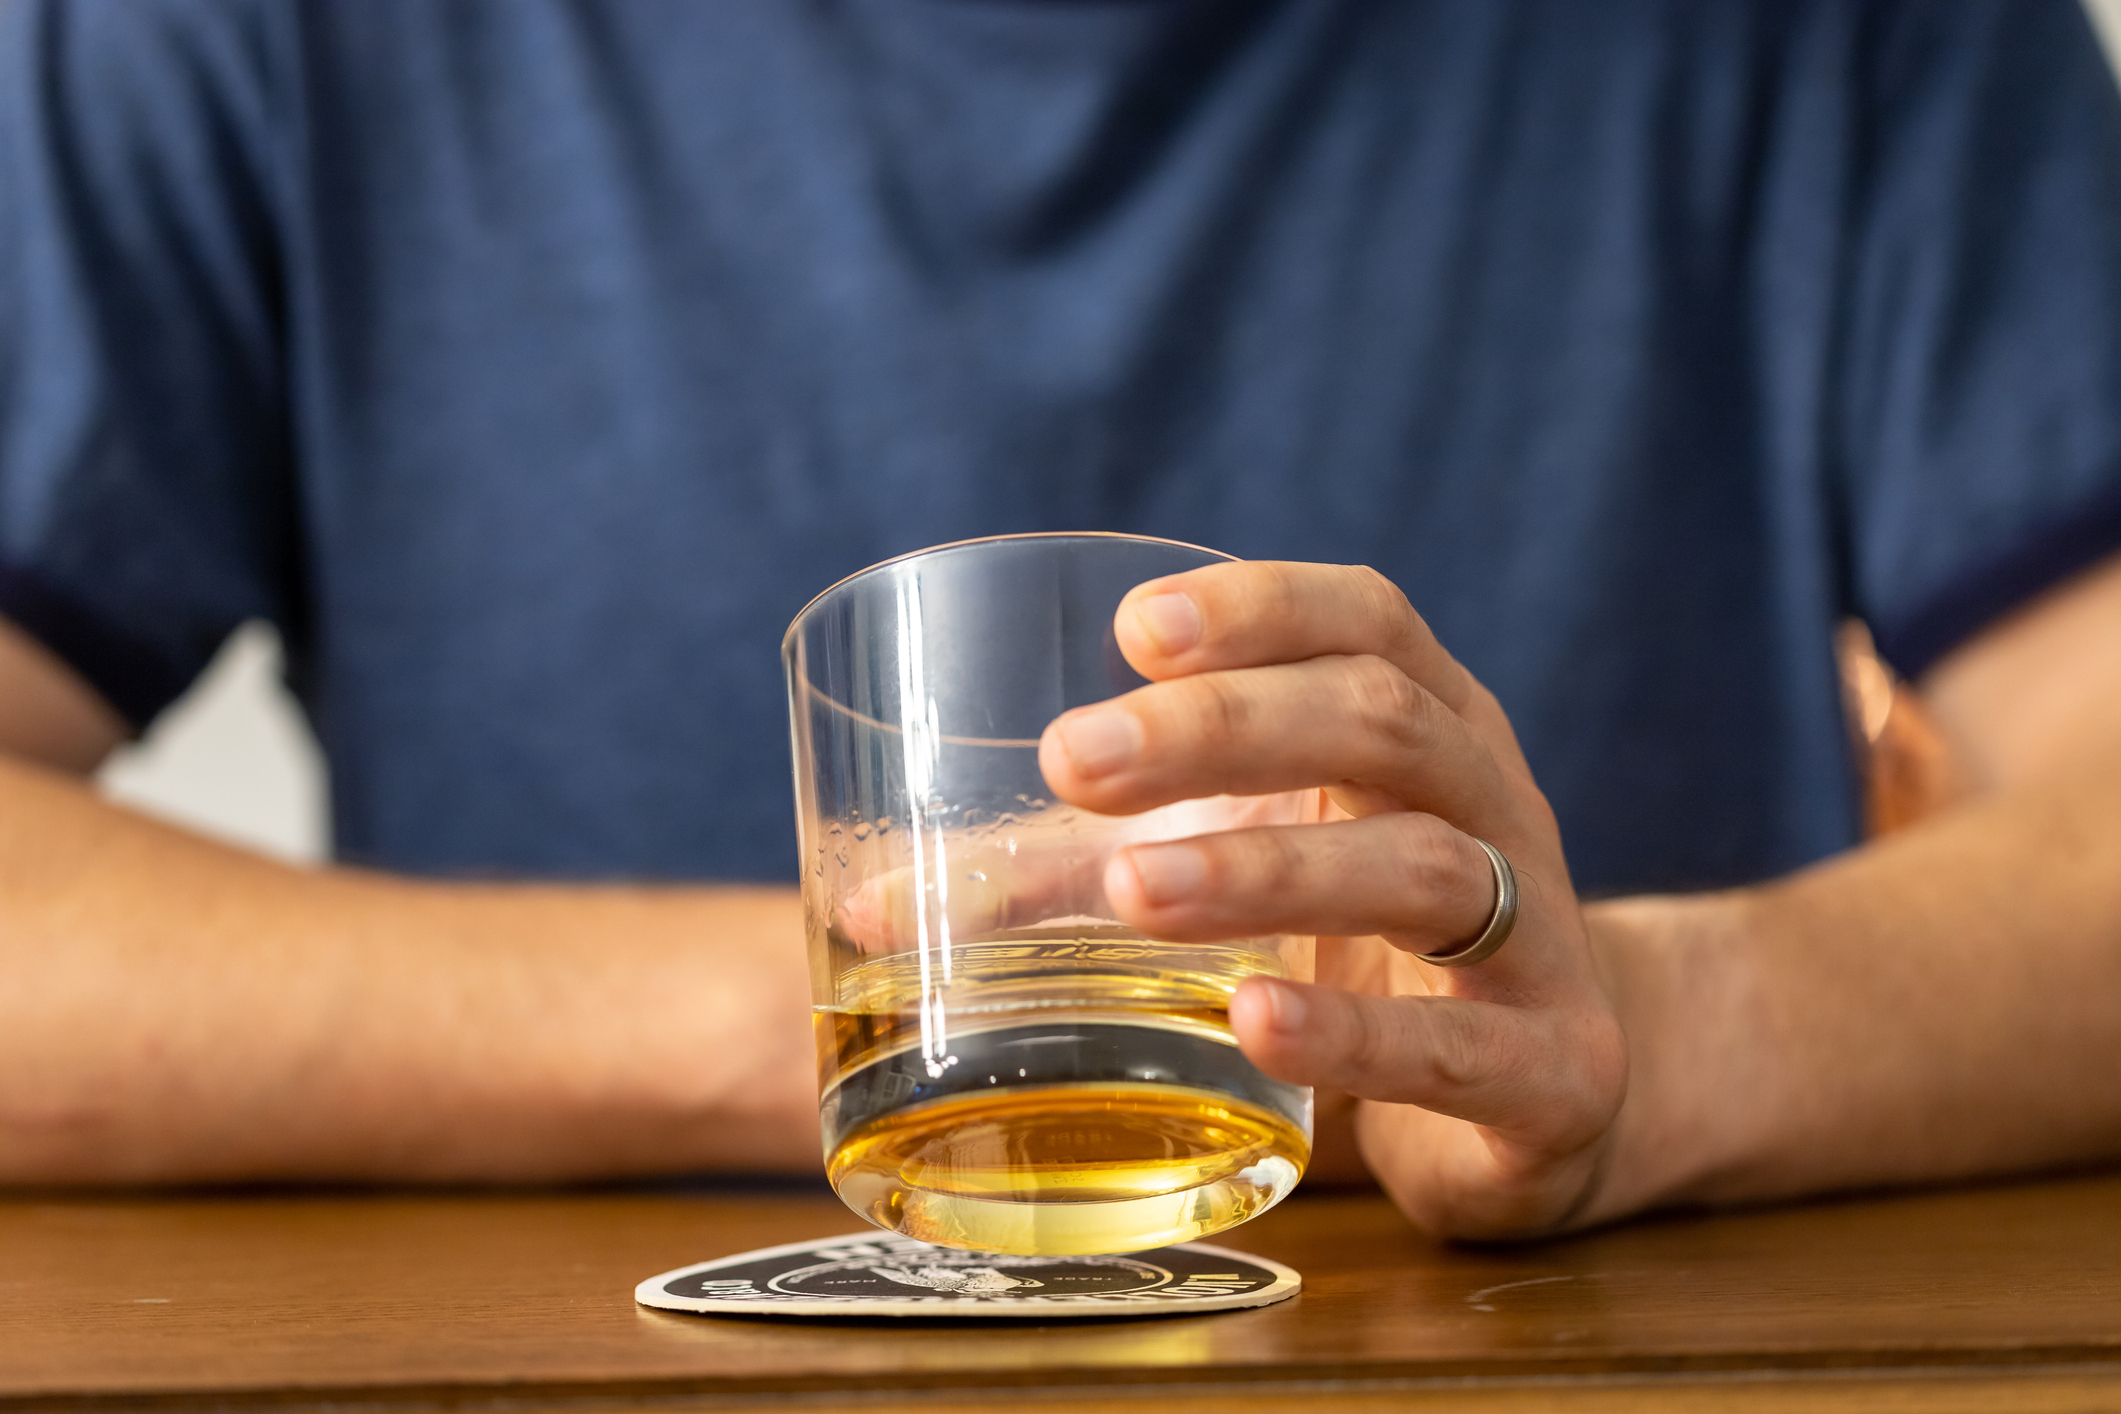 Man Drinking a Glass of Whiskey at a Bar